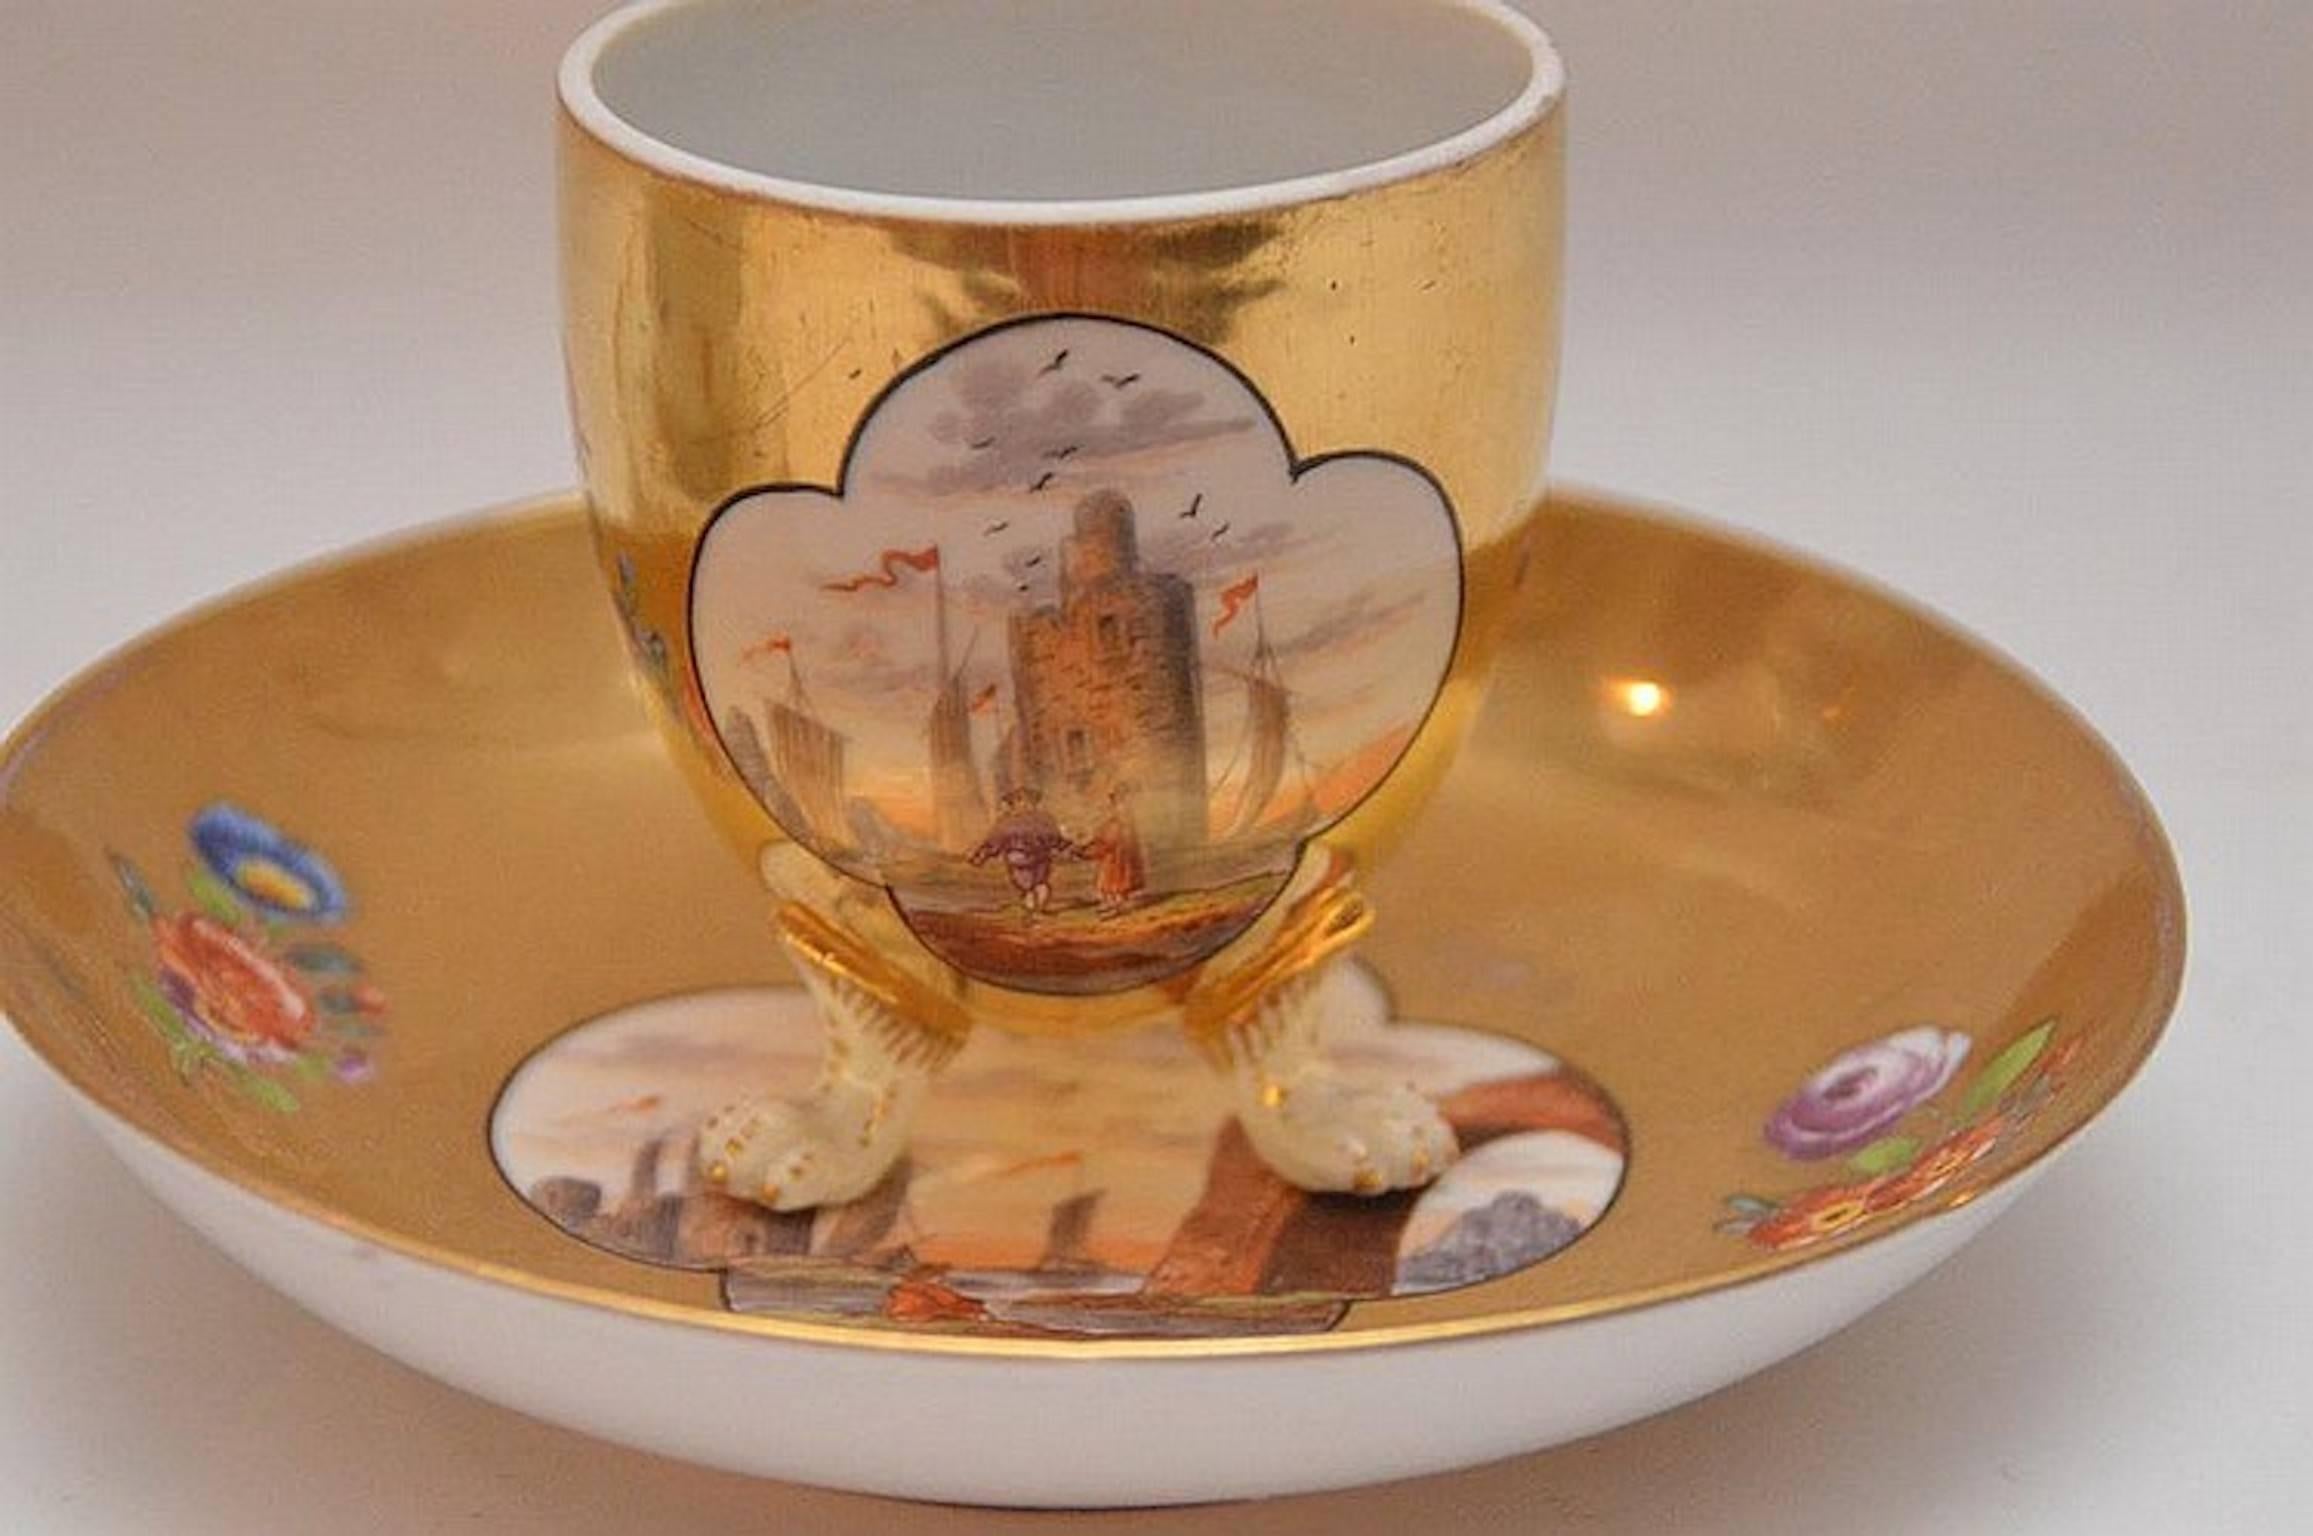 Hand-painted seascape scene on a gilt ground.
Measures: cup 2.75 in W x 3.13 in H
saucer 6.13in W x 1.25 H.
 